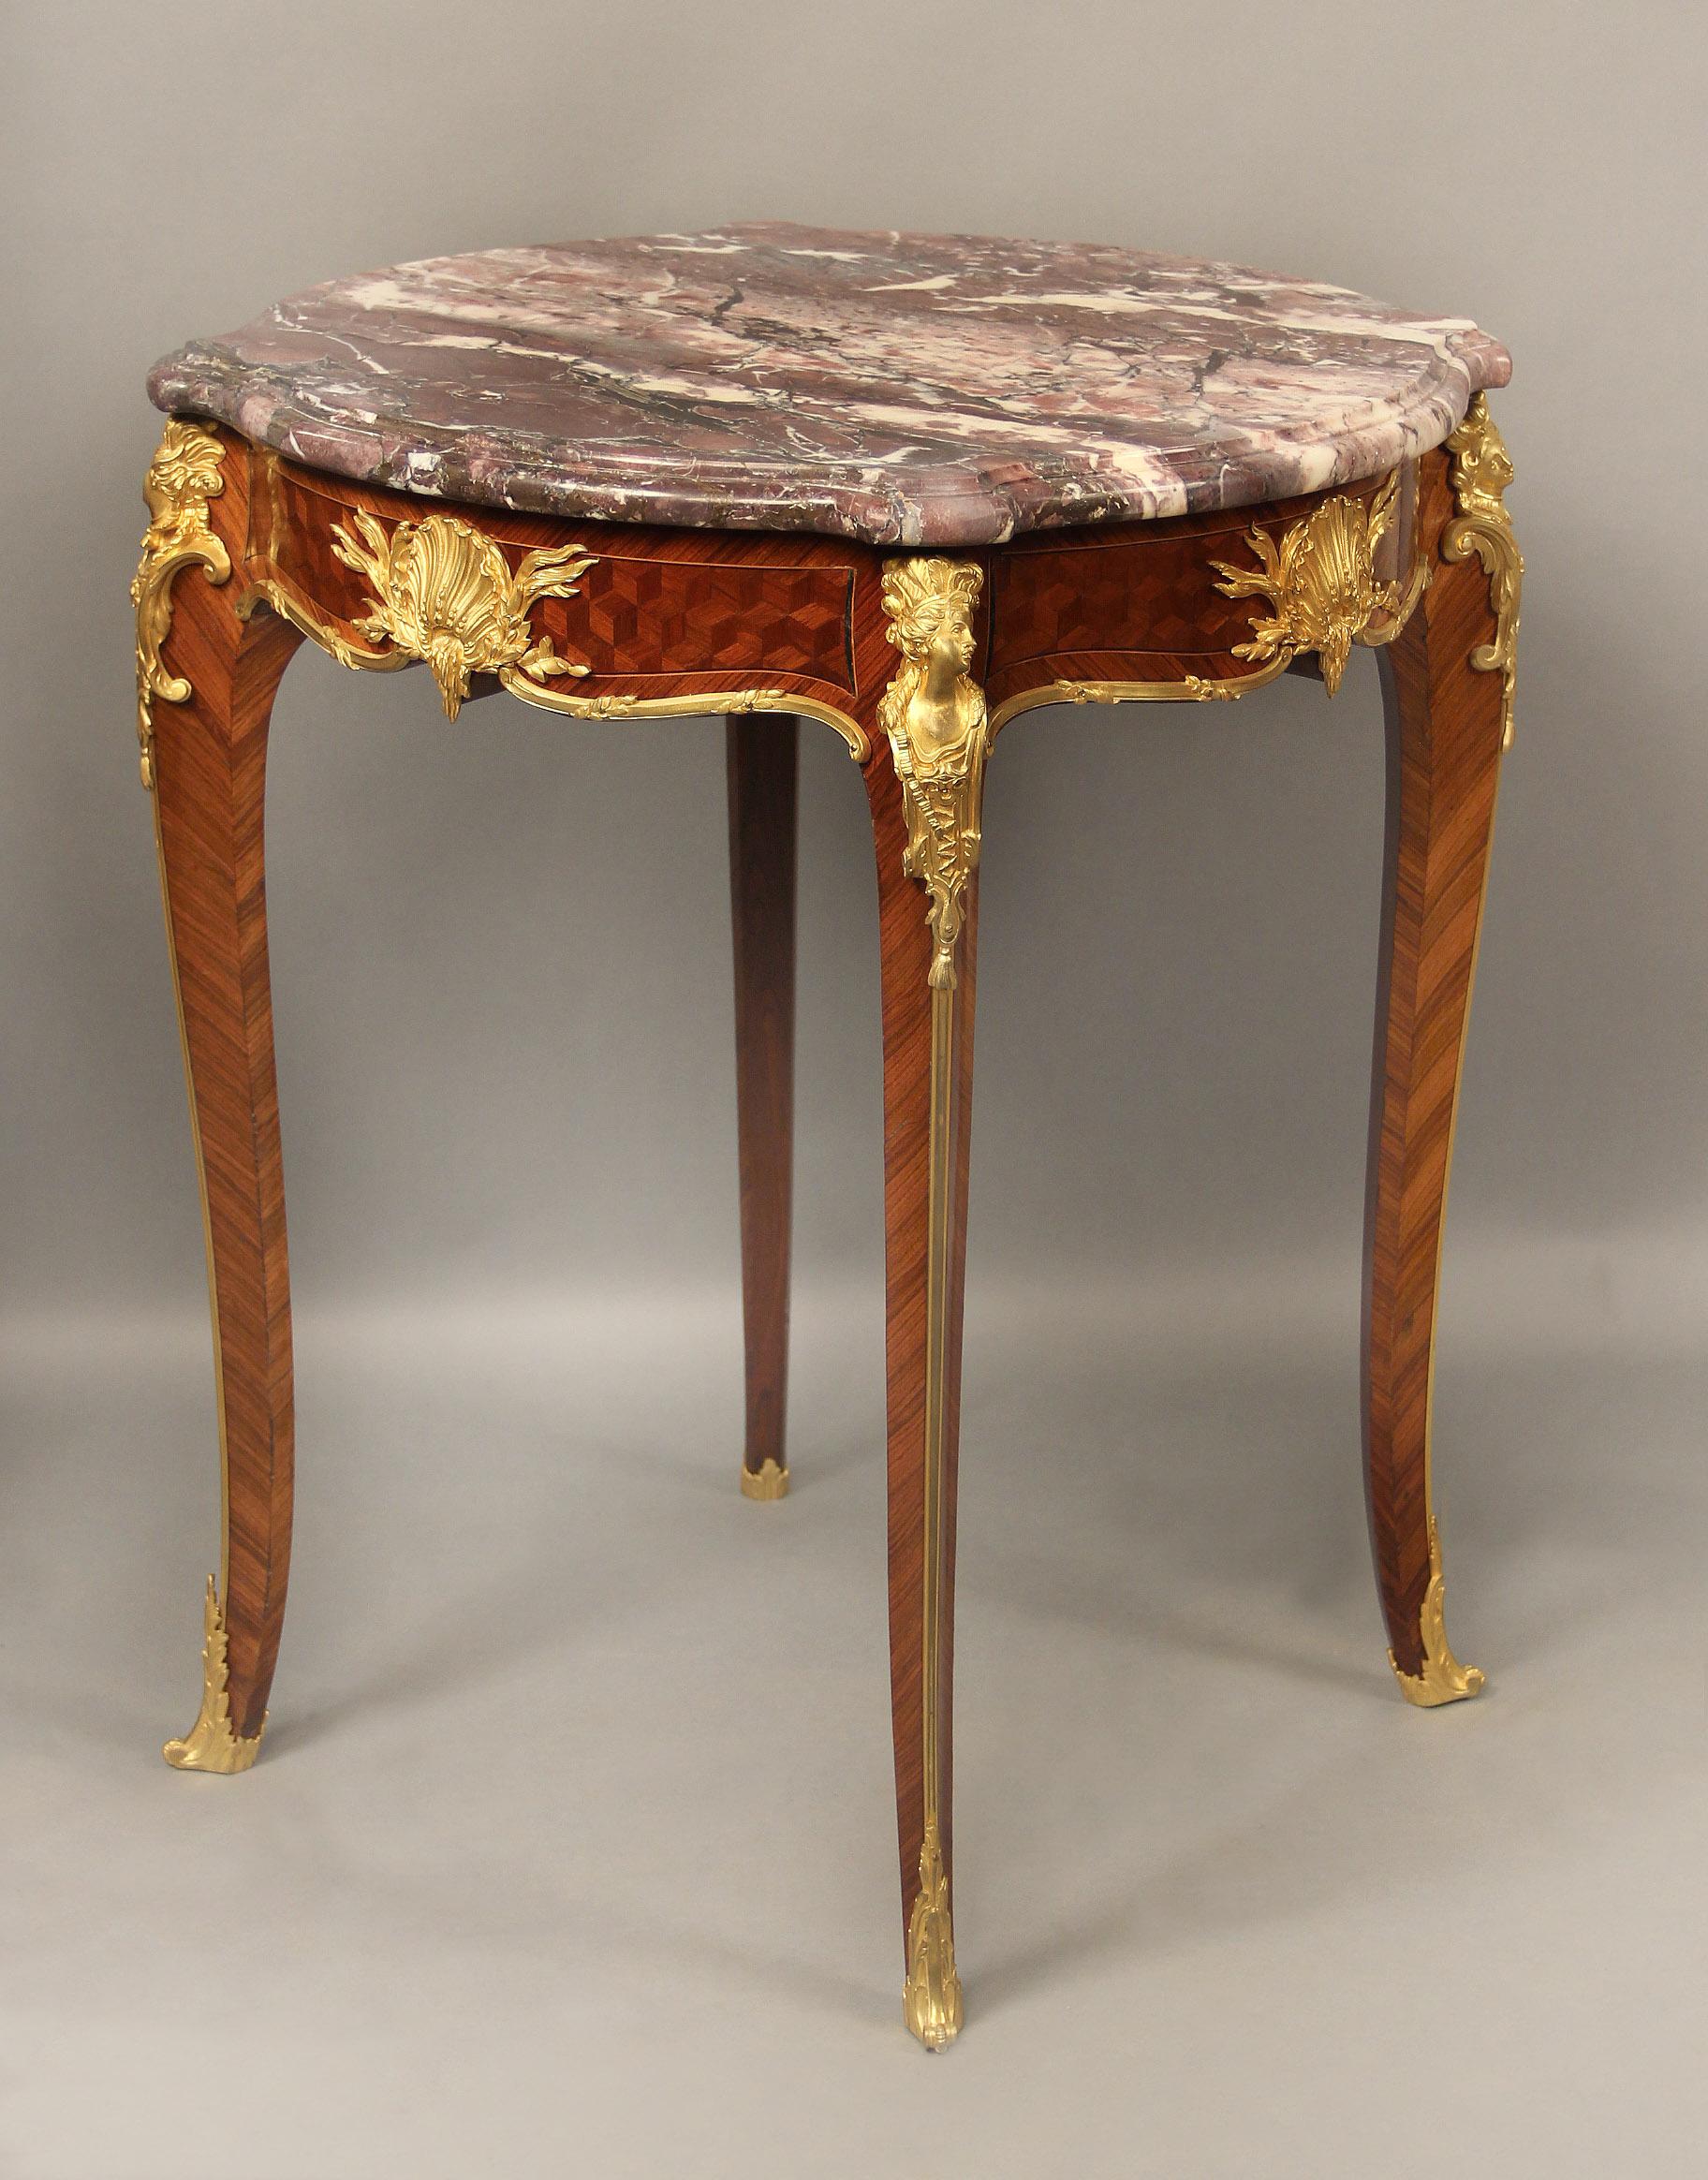 A fine late 19th century Louis XV style gilt bronze mounted cube parquetry guéridon

By François Linke

A marble top above the table decorated to all sides with a gilt bronze leaf-clasped scallop shell mount and to each corner with an